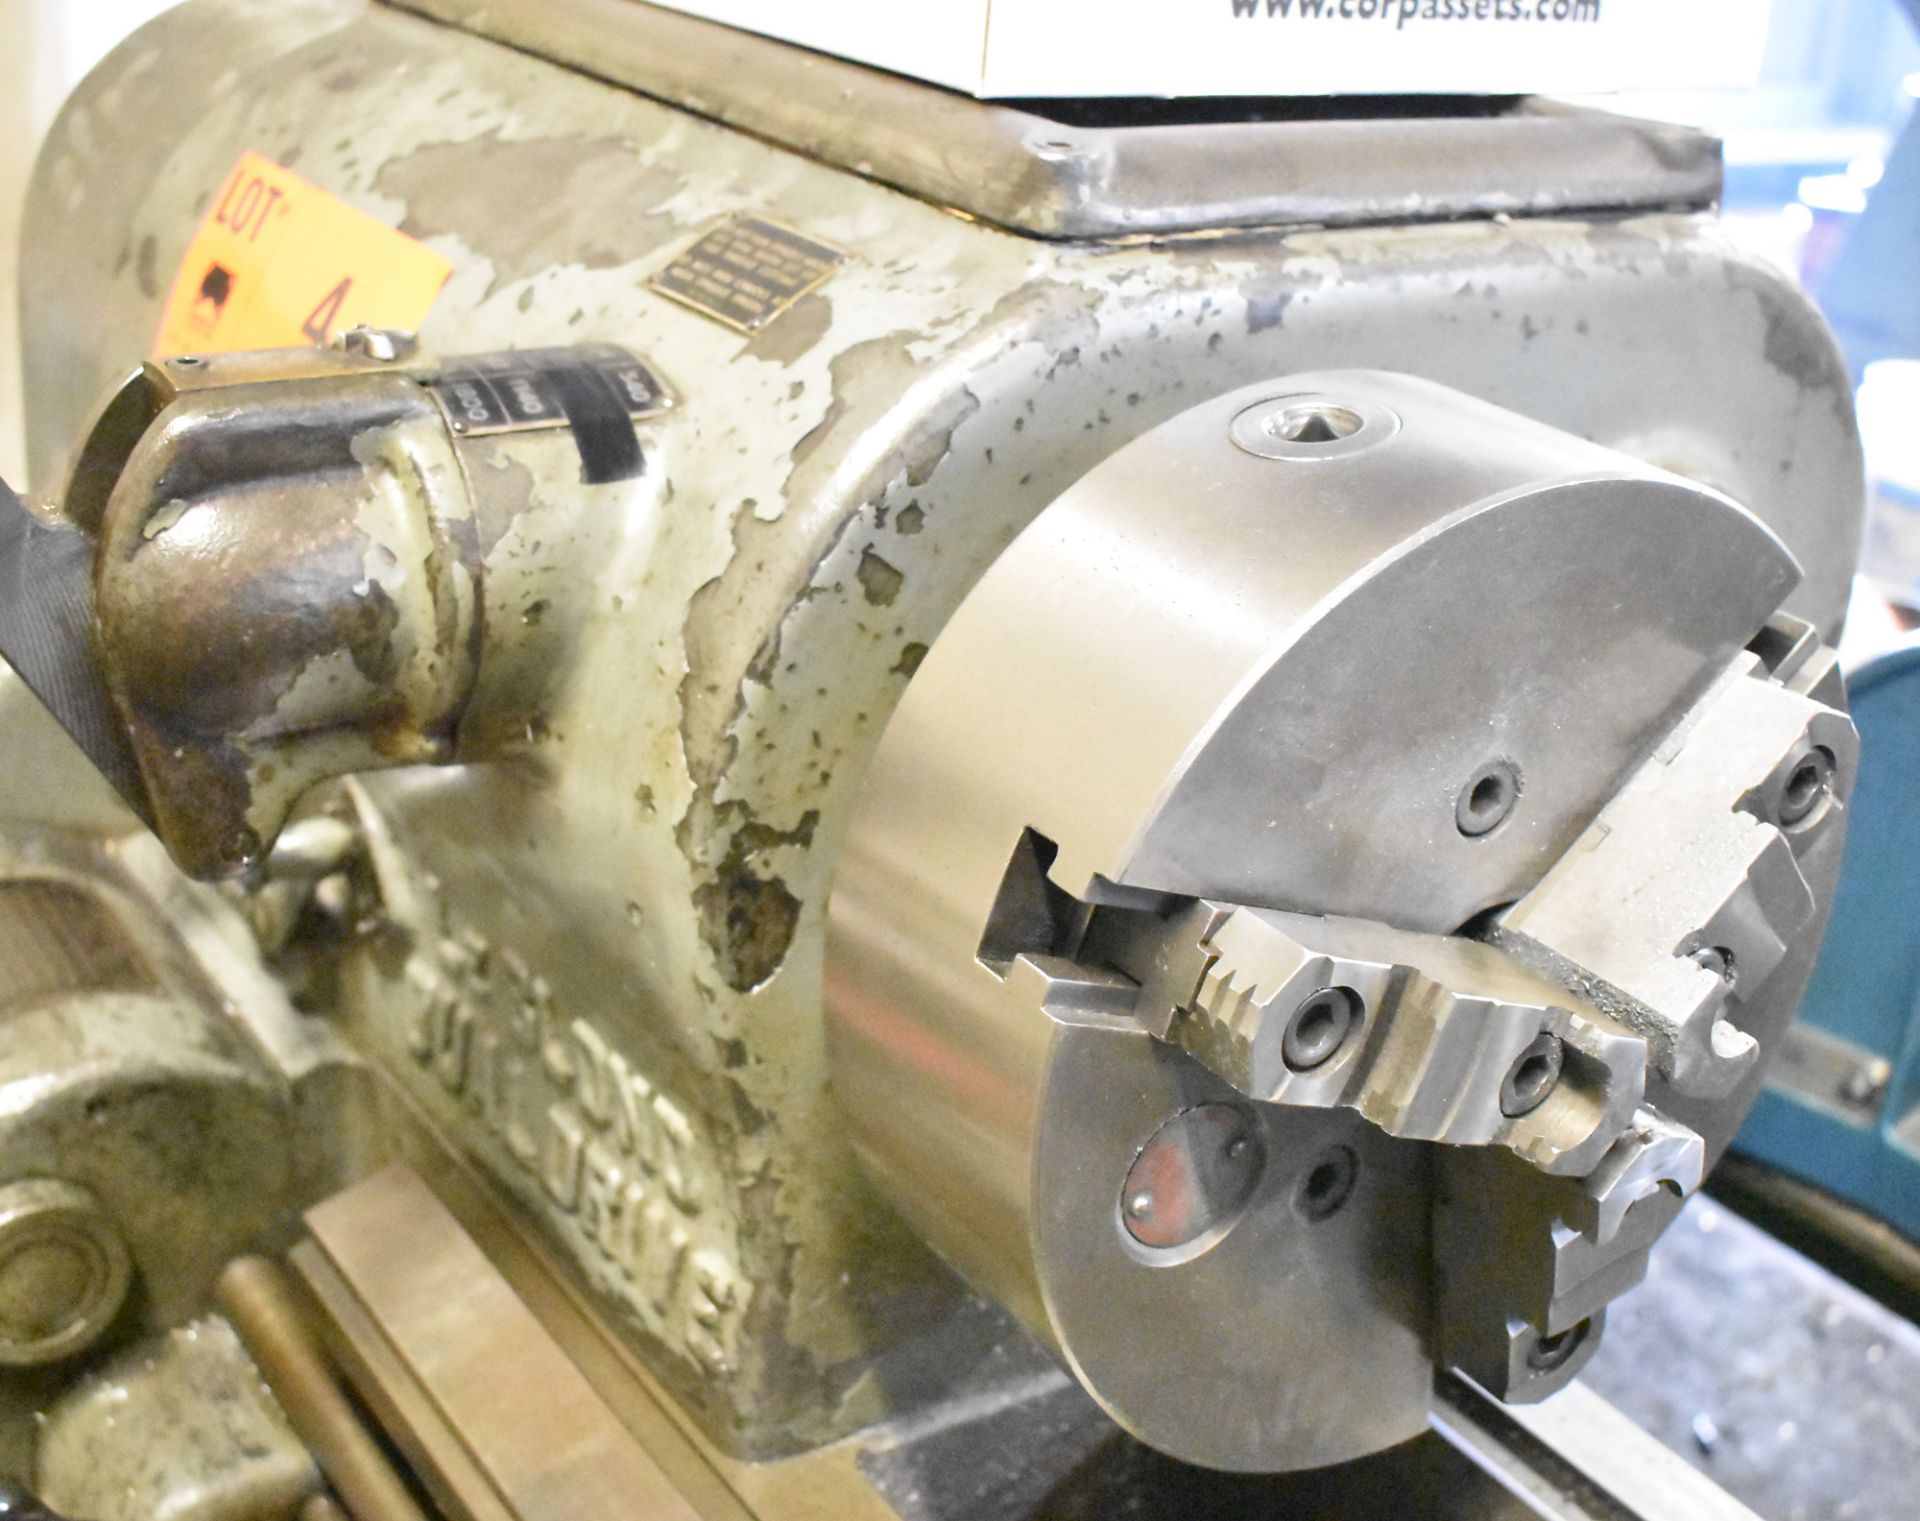 LEBLOND DUAL DRIVE TOOL ROOM ENGINE LATHE WITH 15" SWING, 45" BETWEEN CENTERS, SPEEDS TO 1800 RPM, - Image 3 of 12